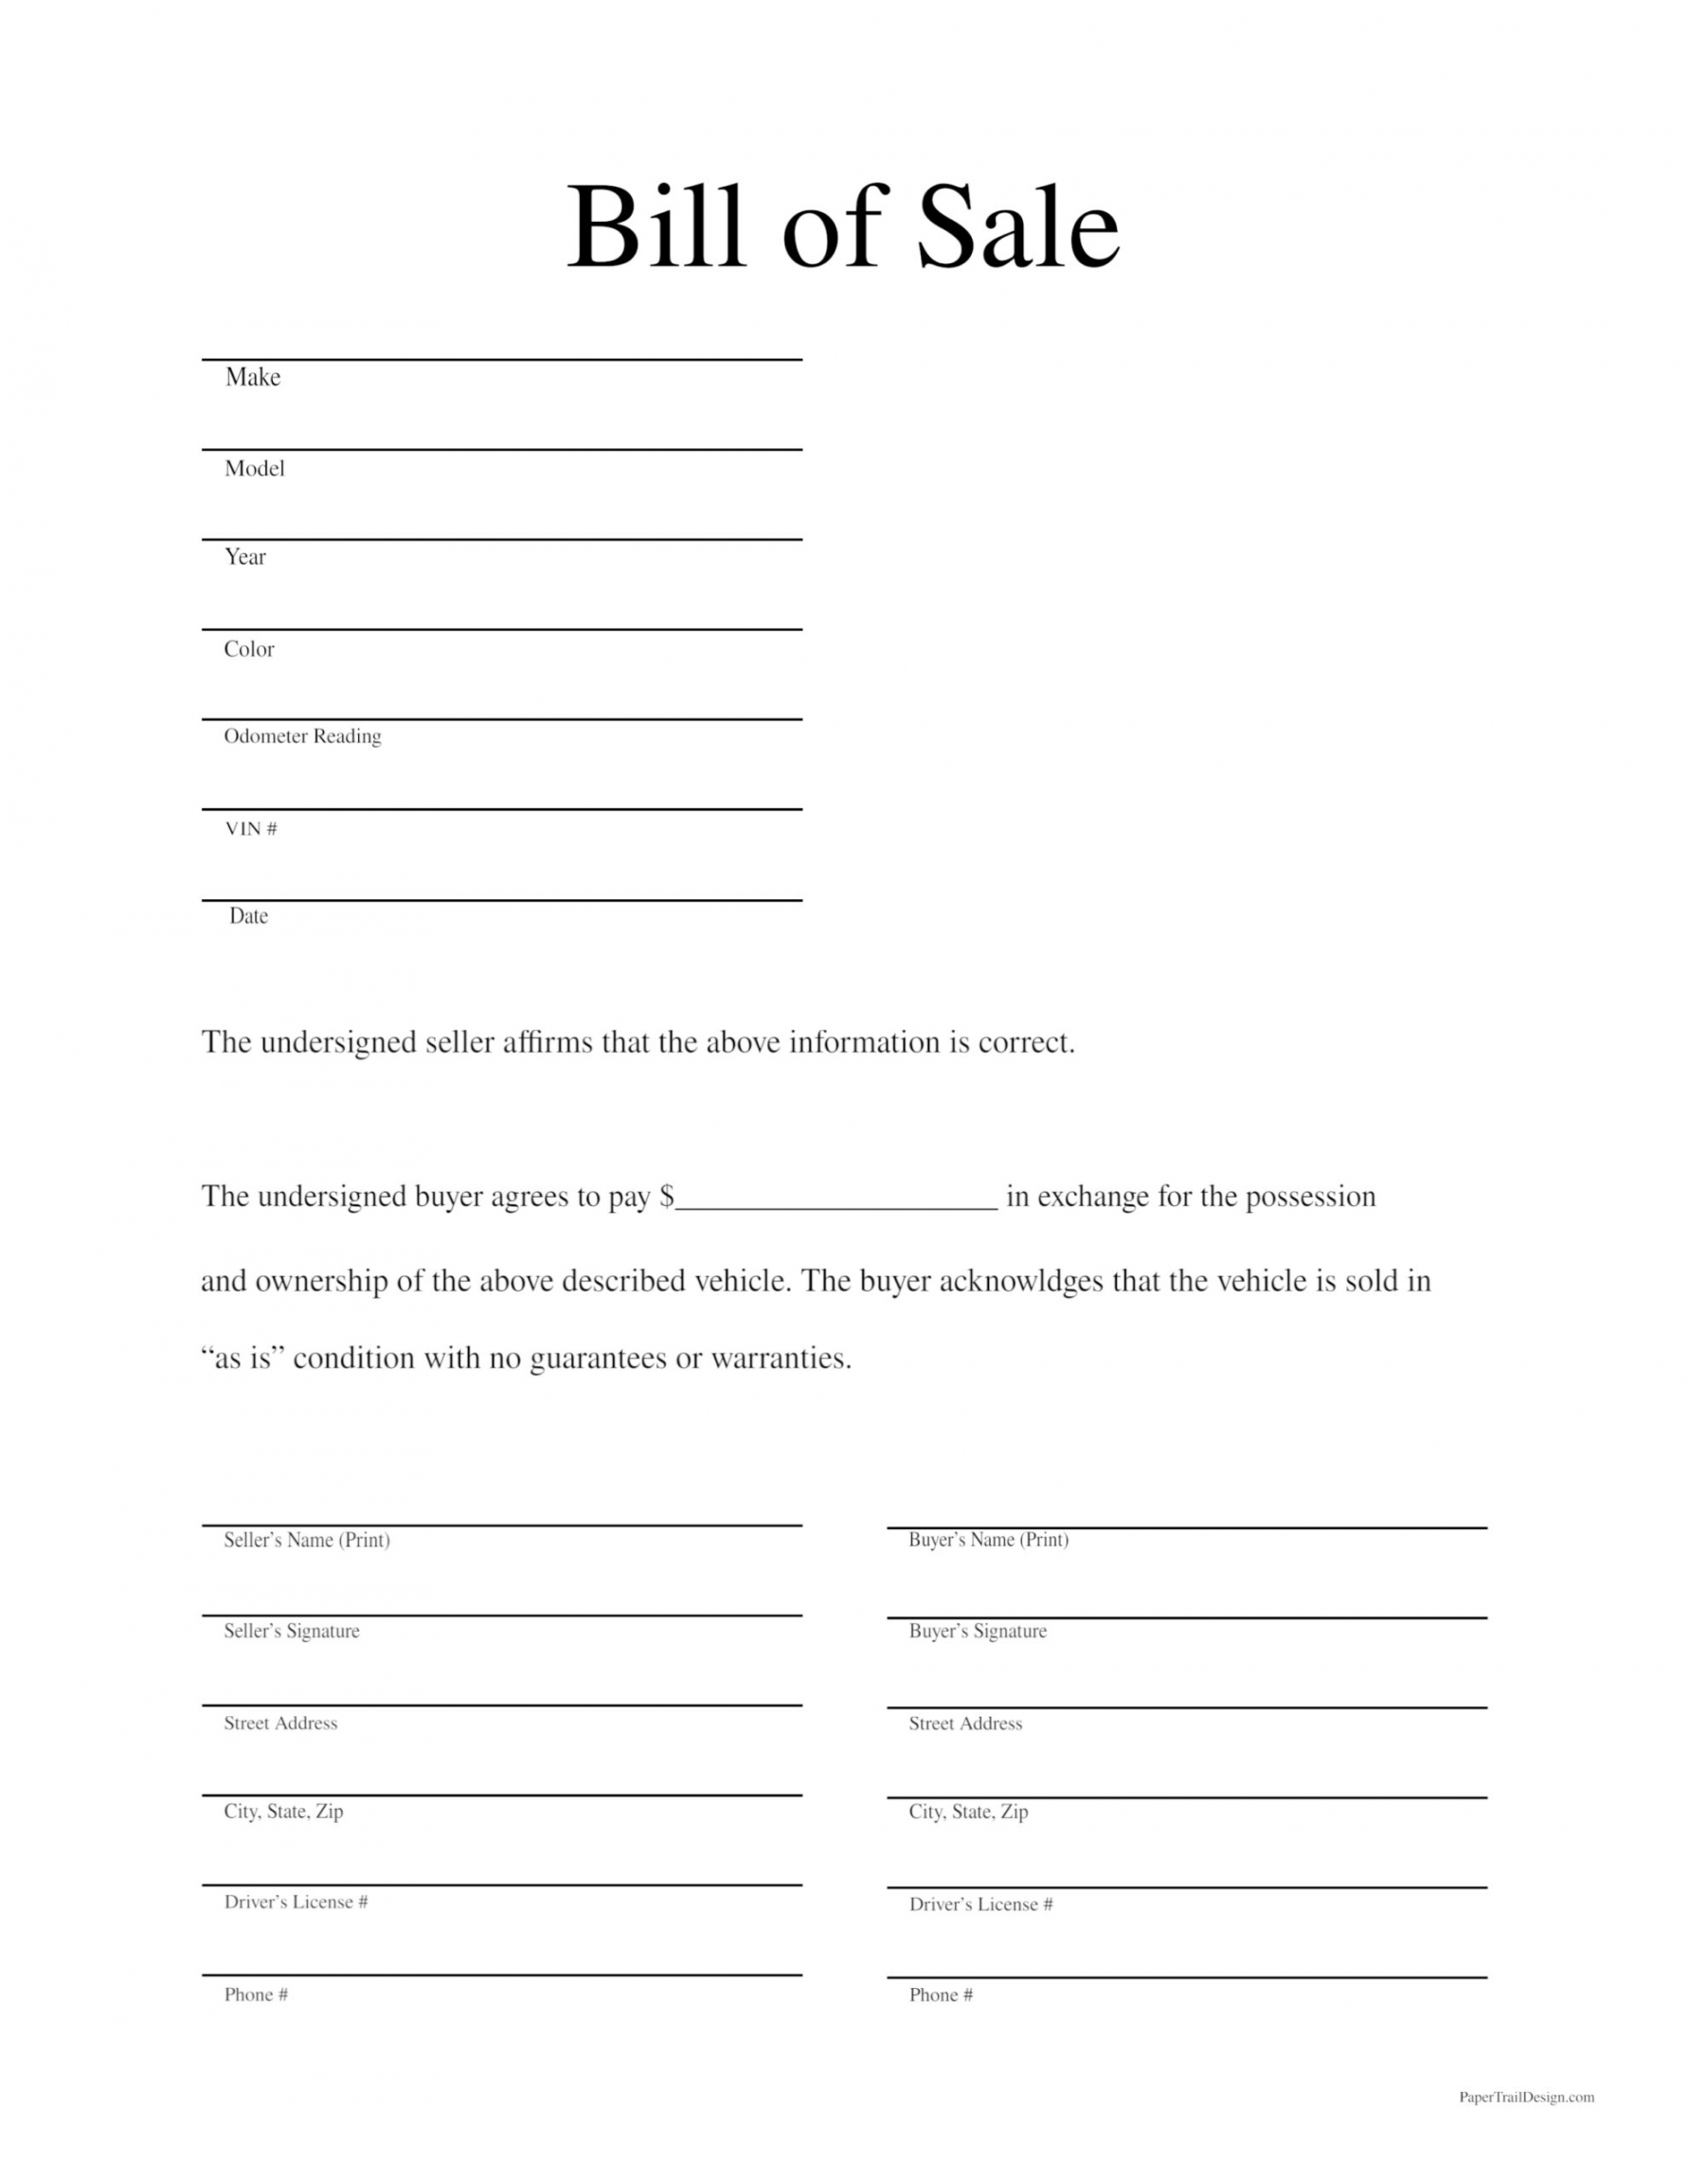 Free Printable Bill of Sale Template - Paper Trail Design